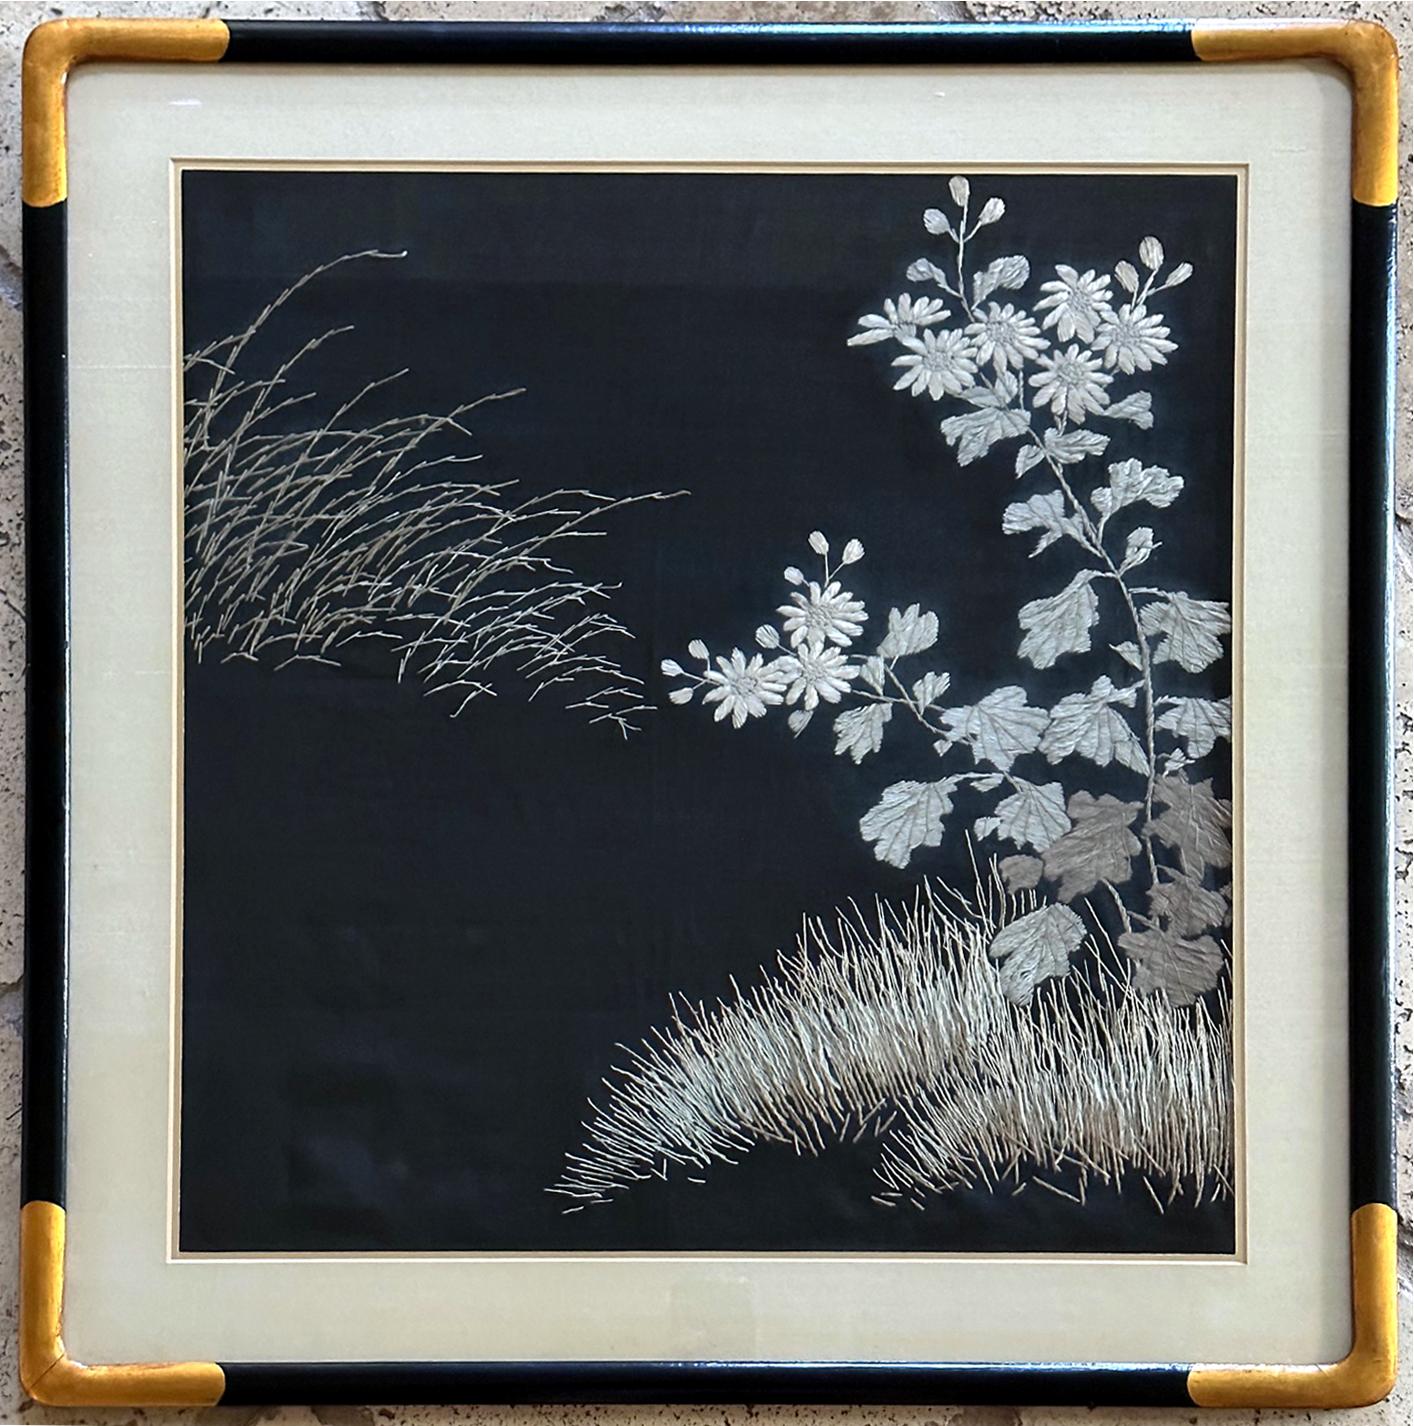 A Japanese textile panel with embroidery needlework circa late Meiji period (1900s) presented in a gilt wood frame with silk mat. The work depicts a lovely arrangement of Japanese chrysanthemum flowers with autumn grasses swaying the wind. Silk